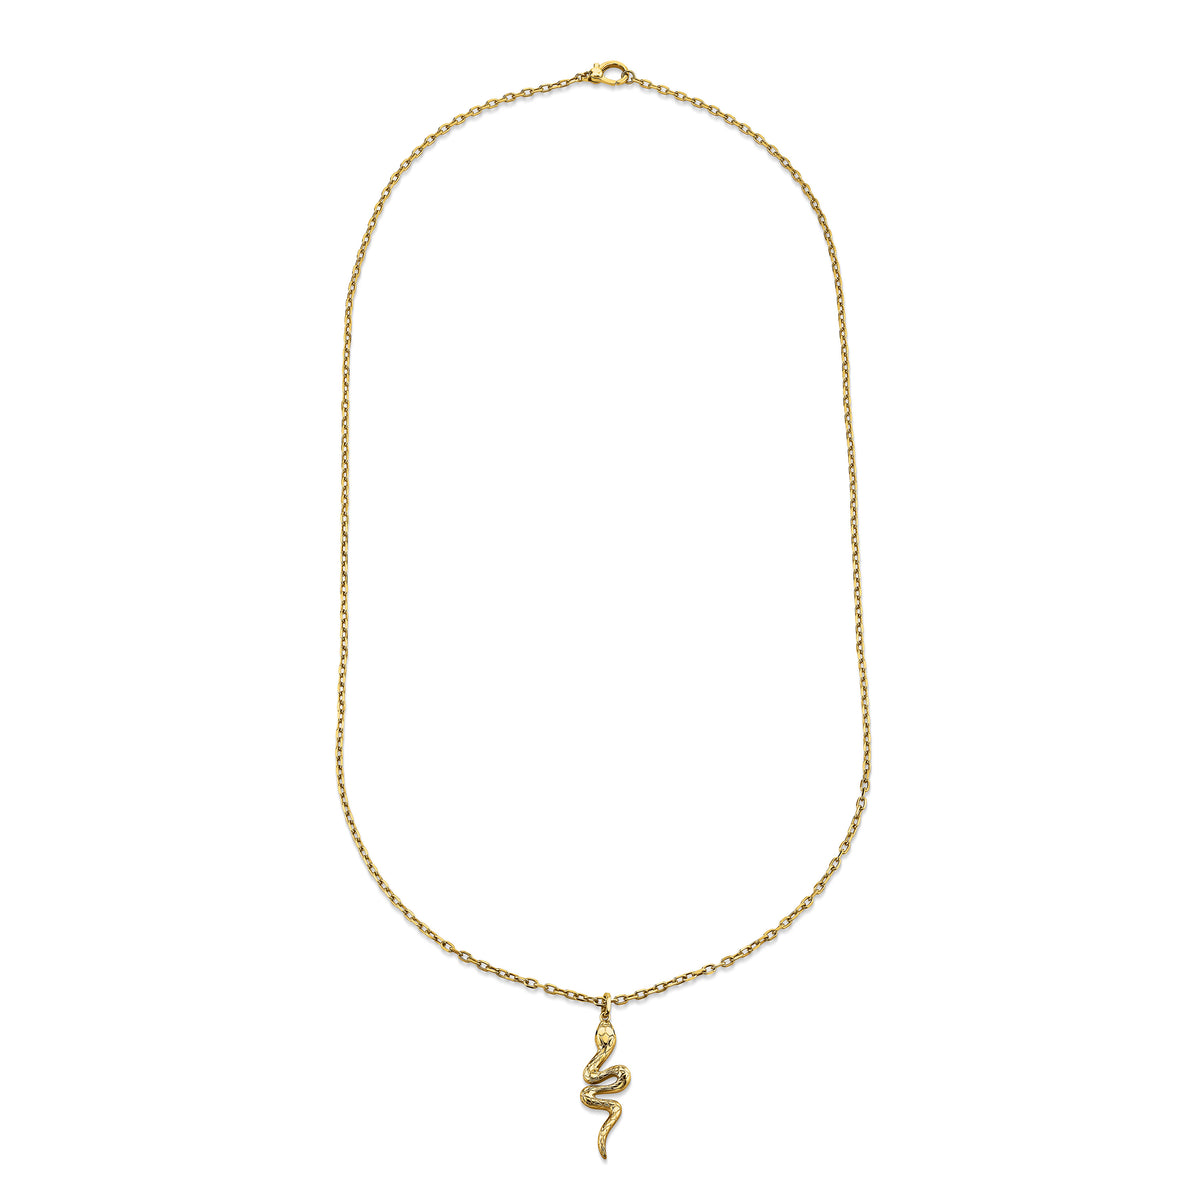 SOLID GOLD SNAKE PENDANT NECKLACE